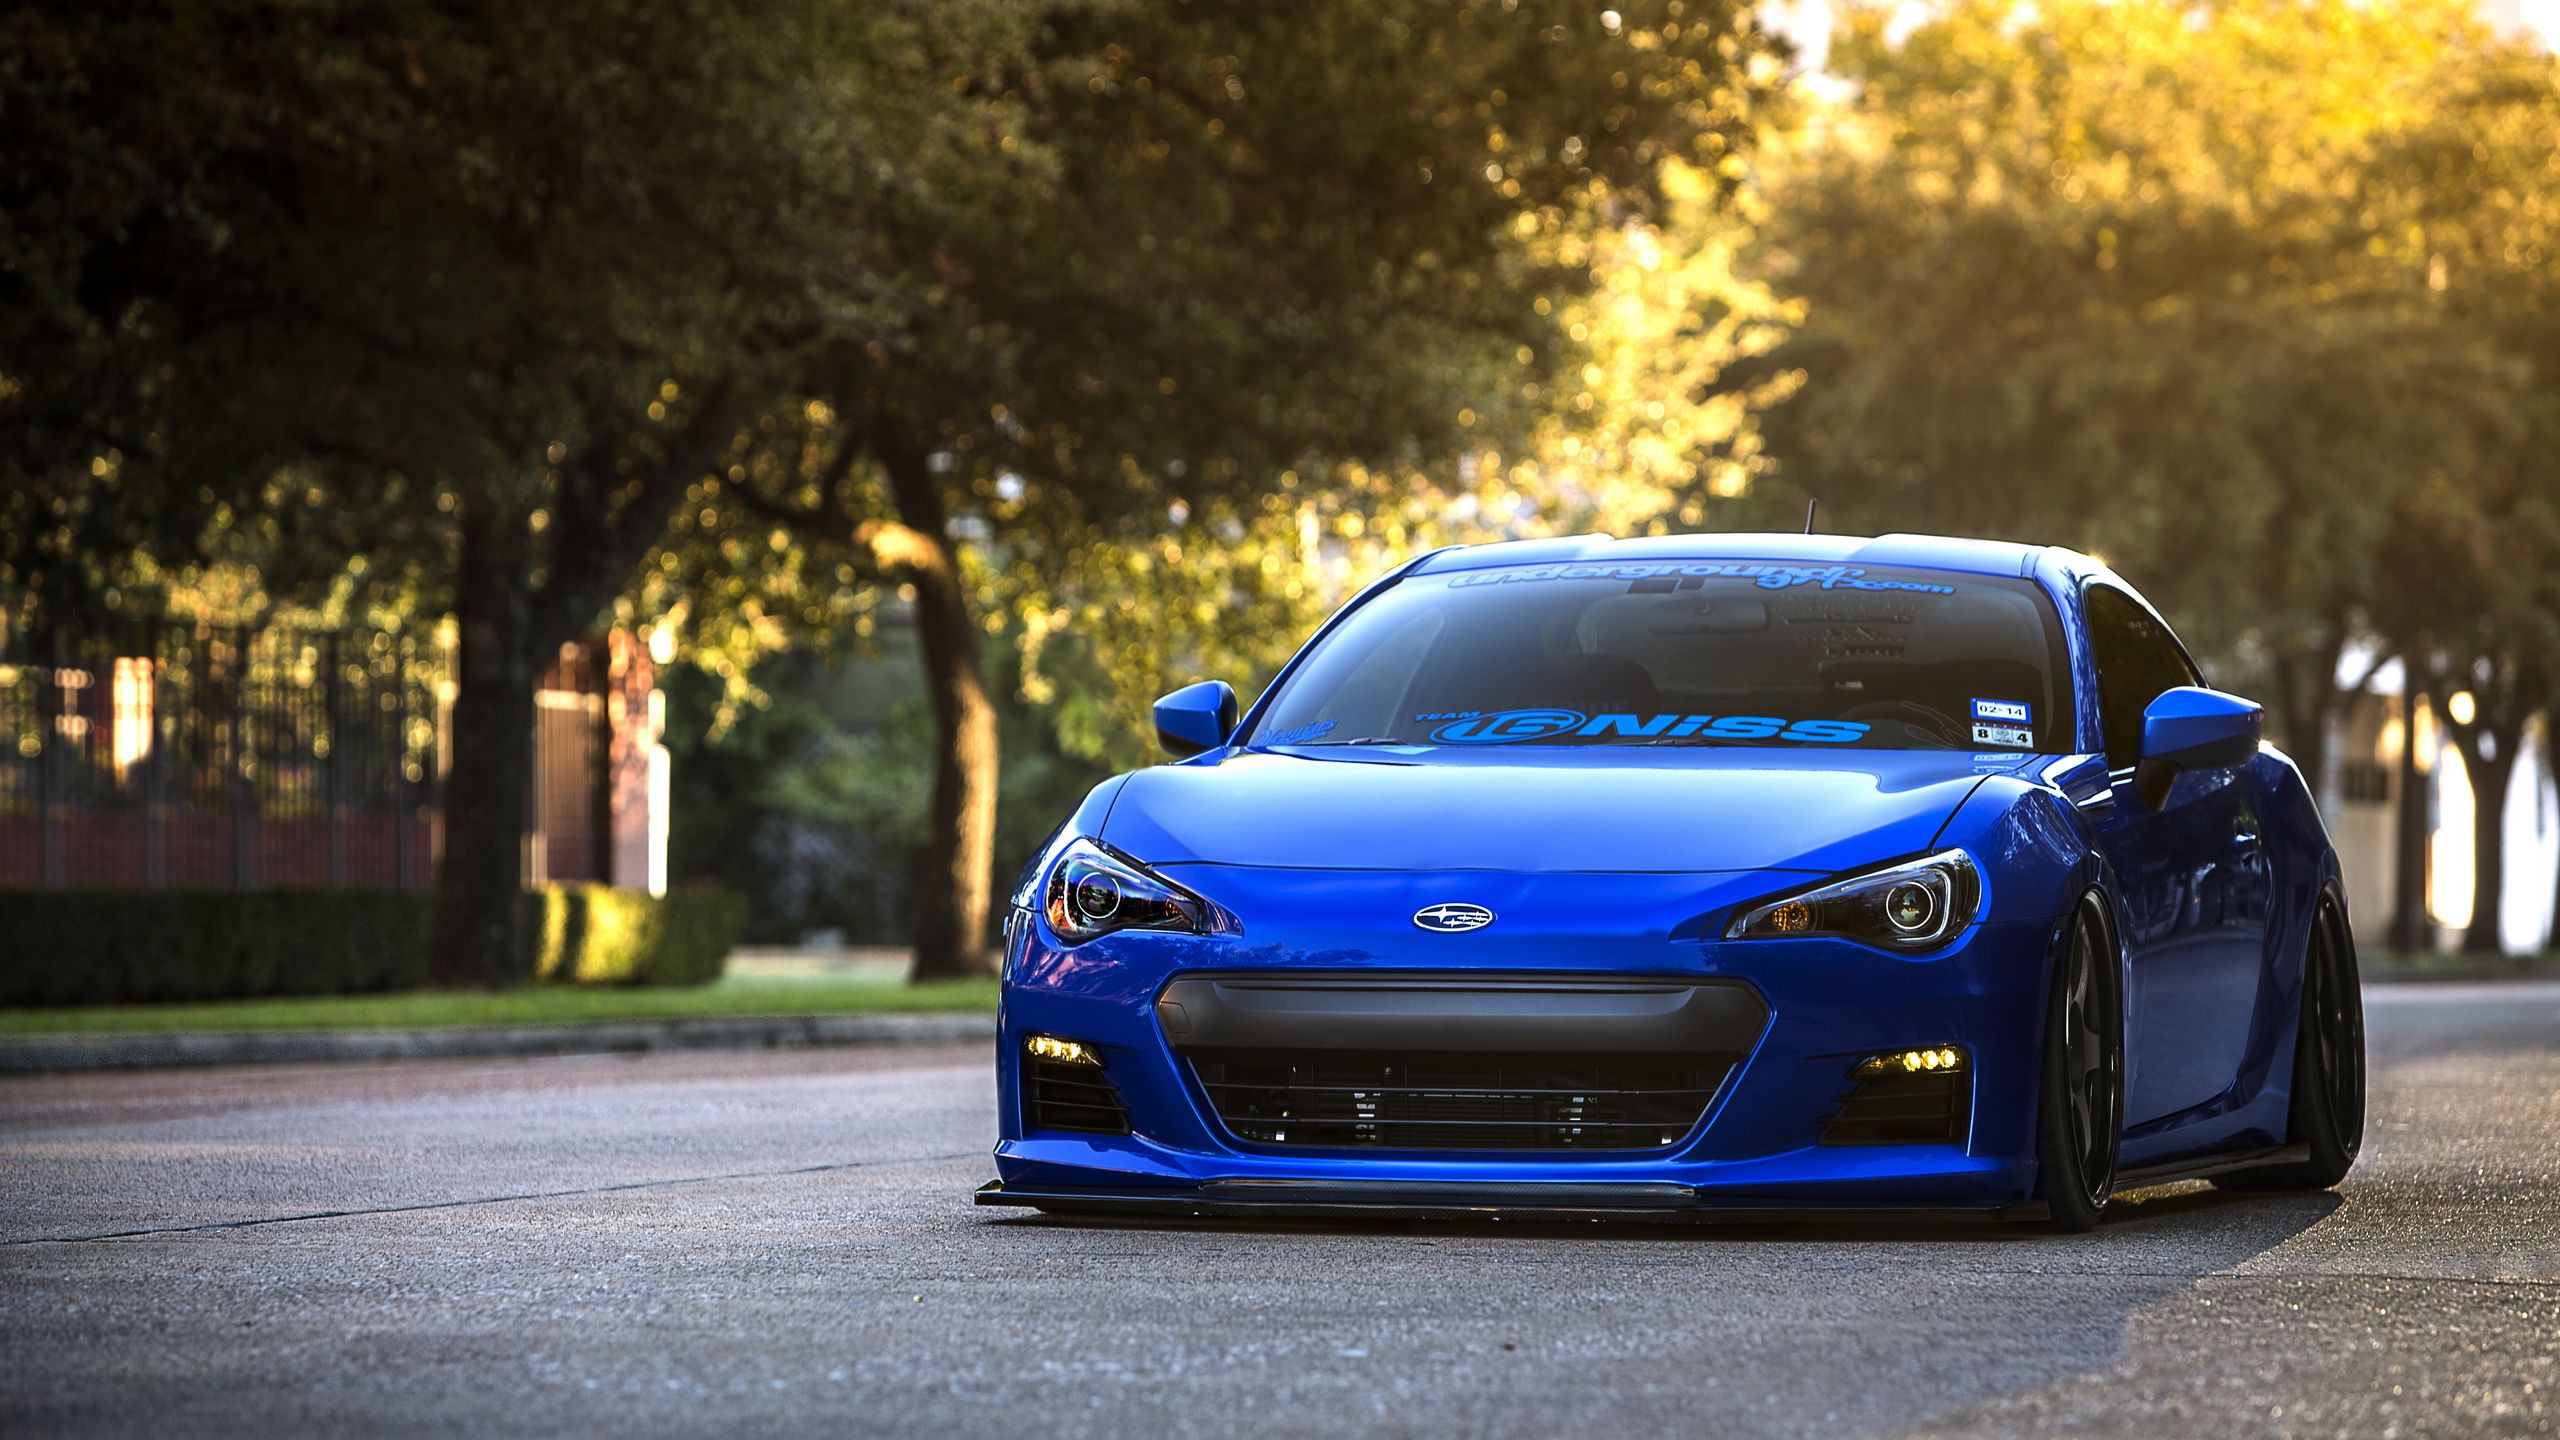 Download Wallpaper 2560x1440 Subaru Brz Blue Front Sports Car Coupe Widescreen 16 9 Hd Background